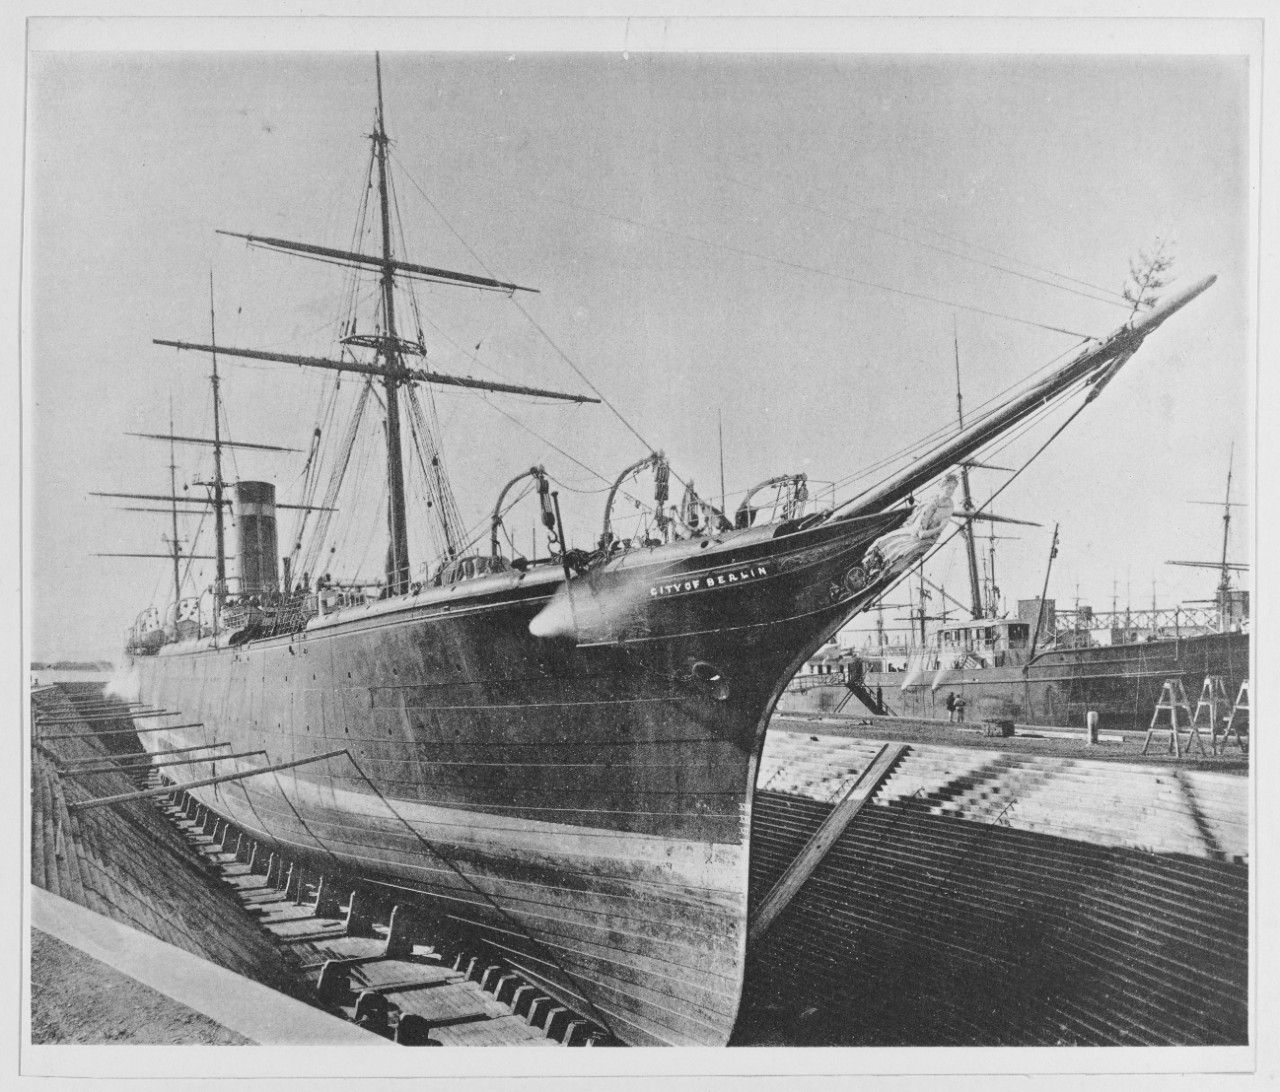 Dock No 2 with SS City of Berlin.